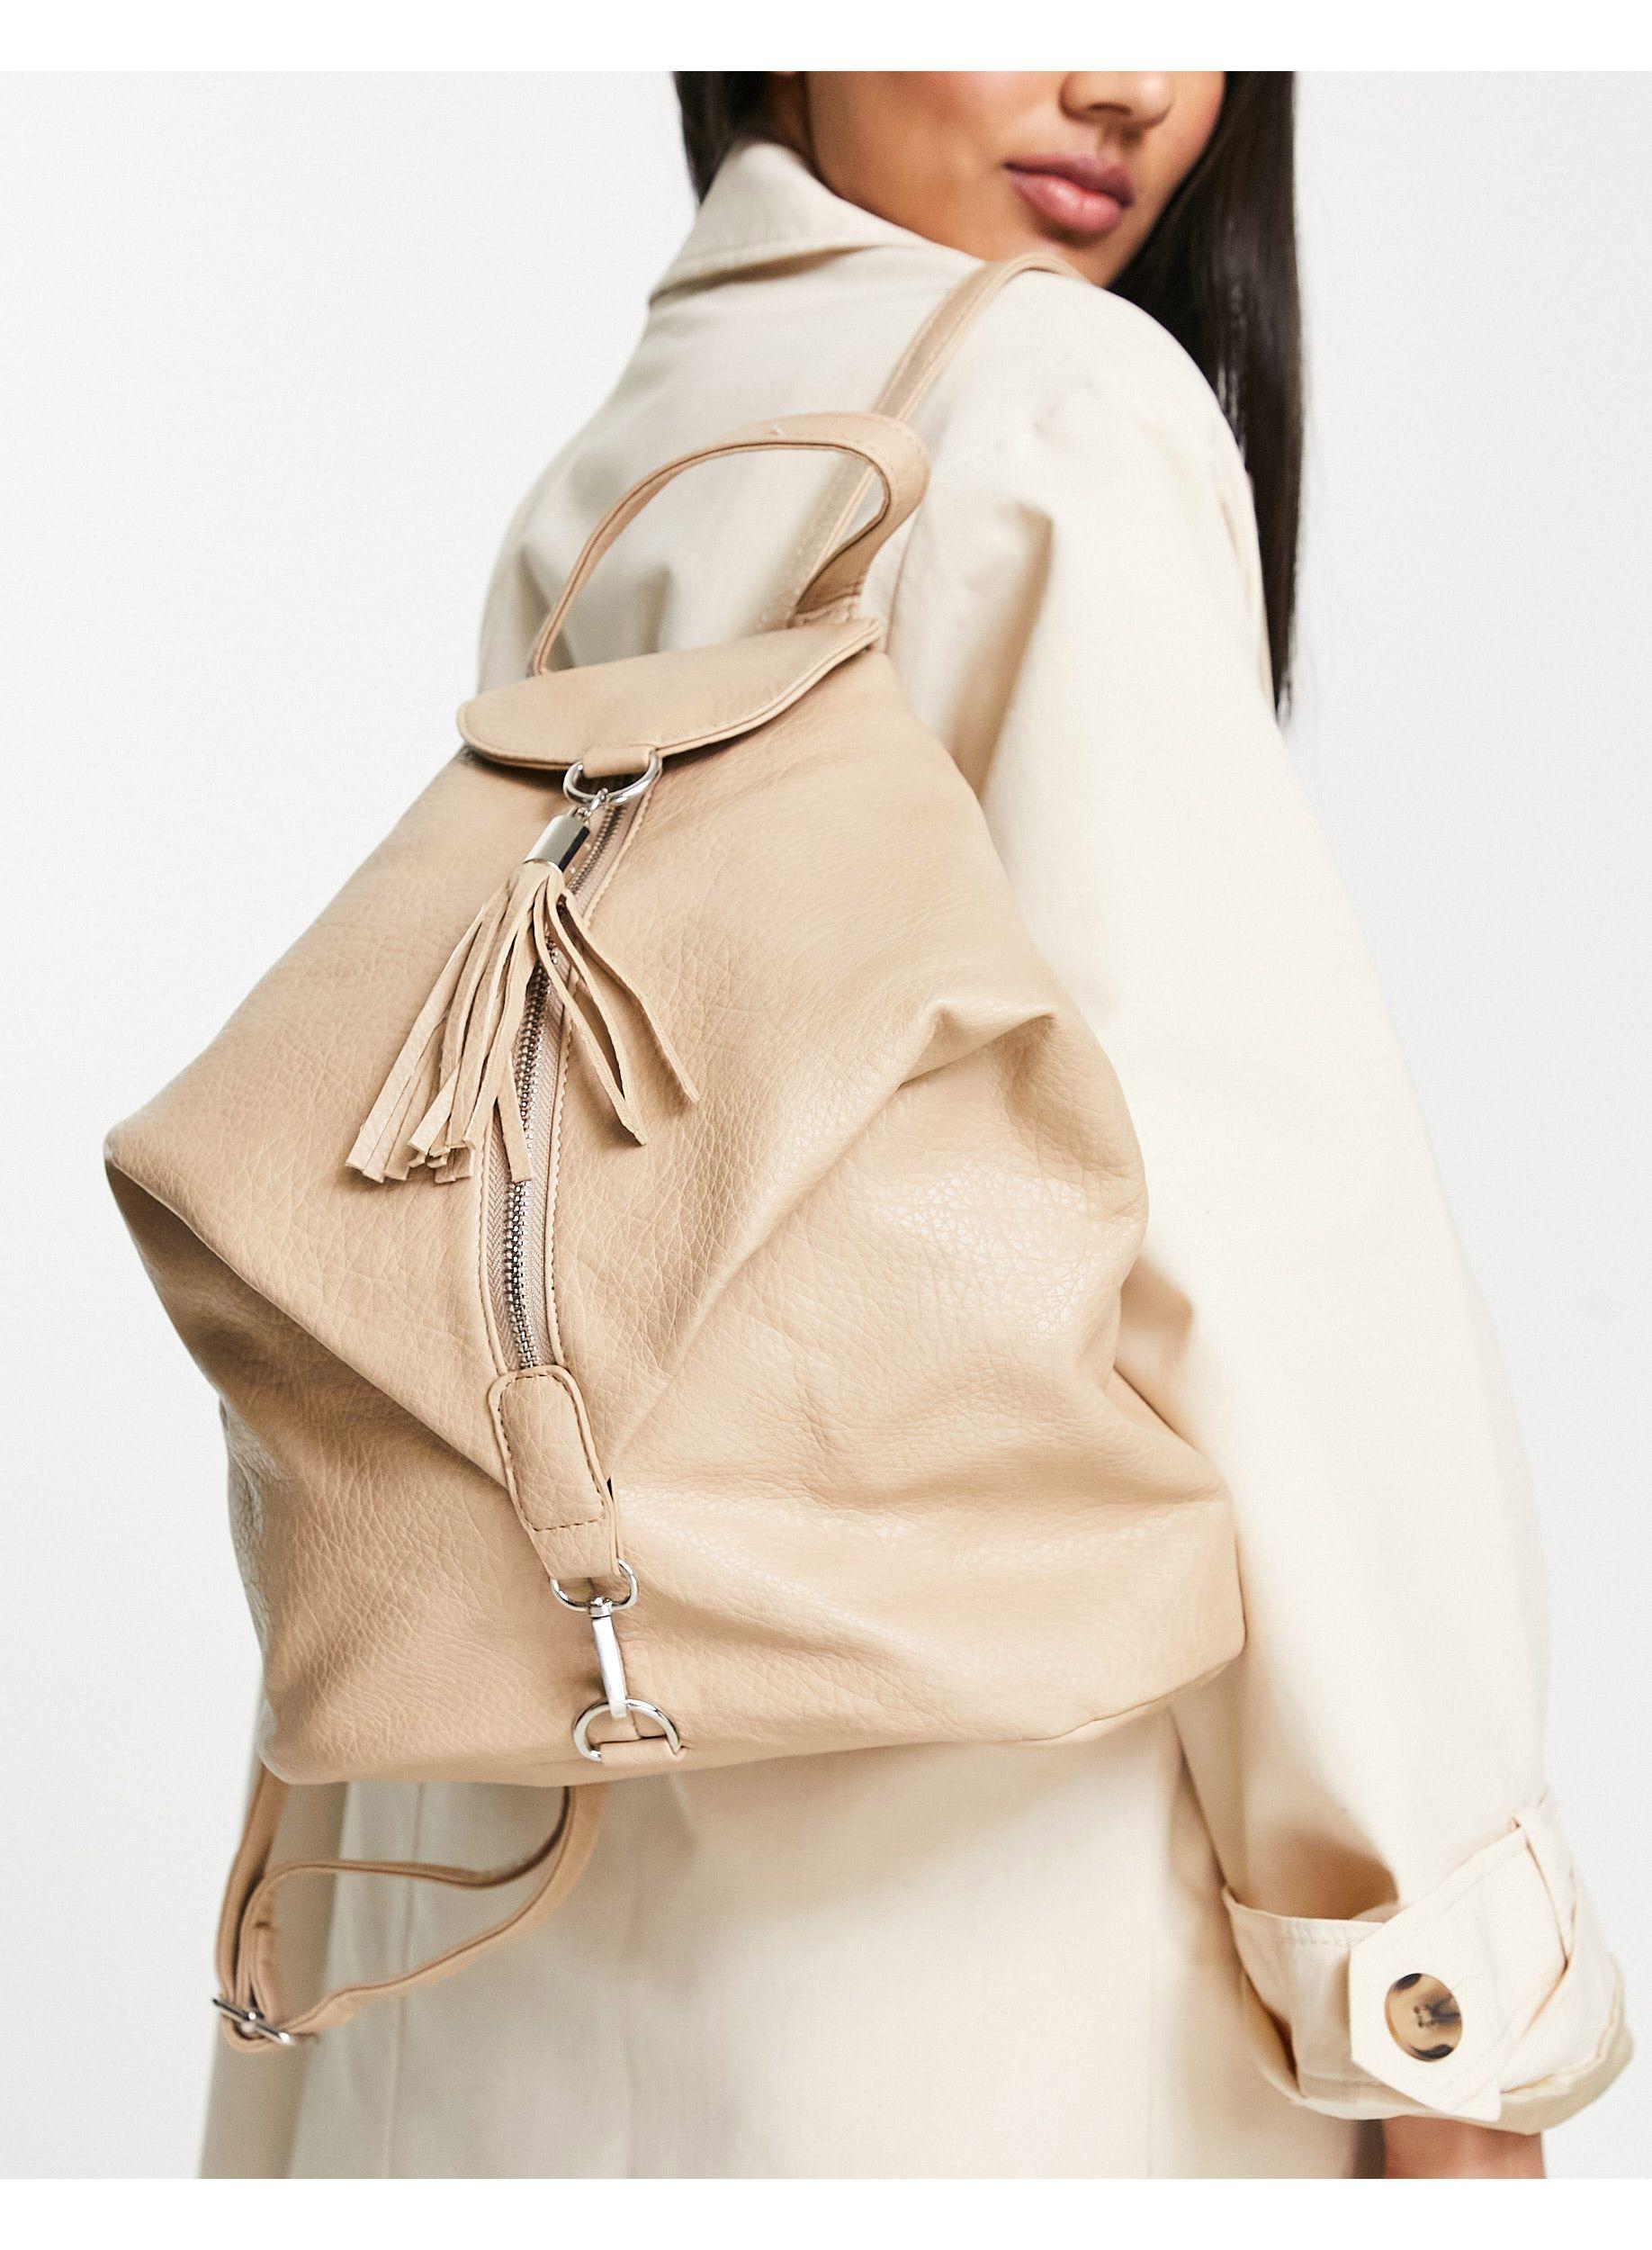 NEVERN WOMEN'S BACKPACK - CHAMPAGNE PEARL - tohl